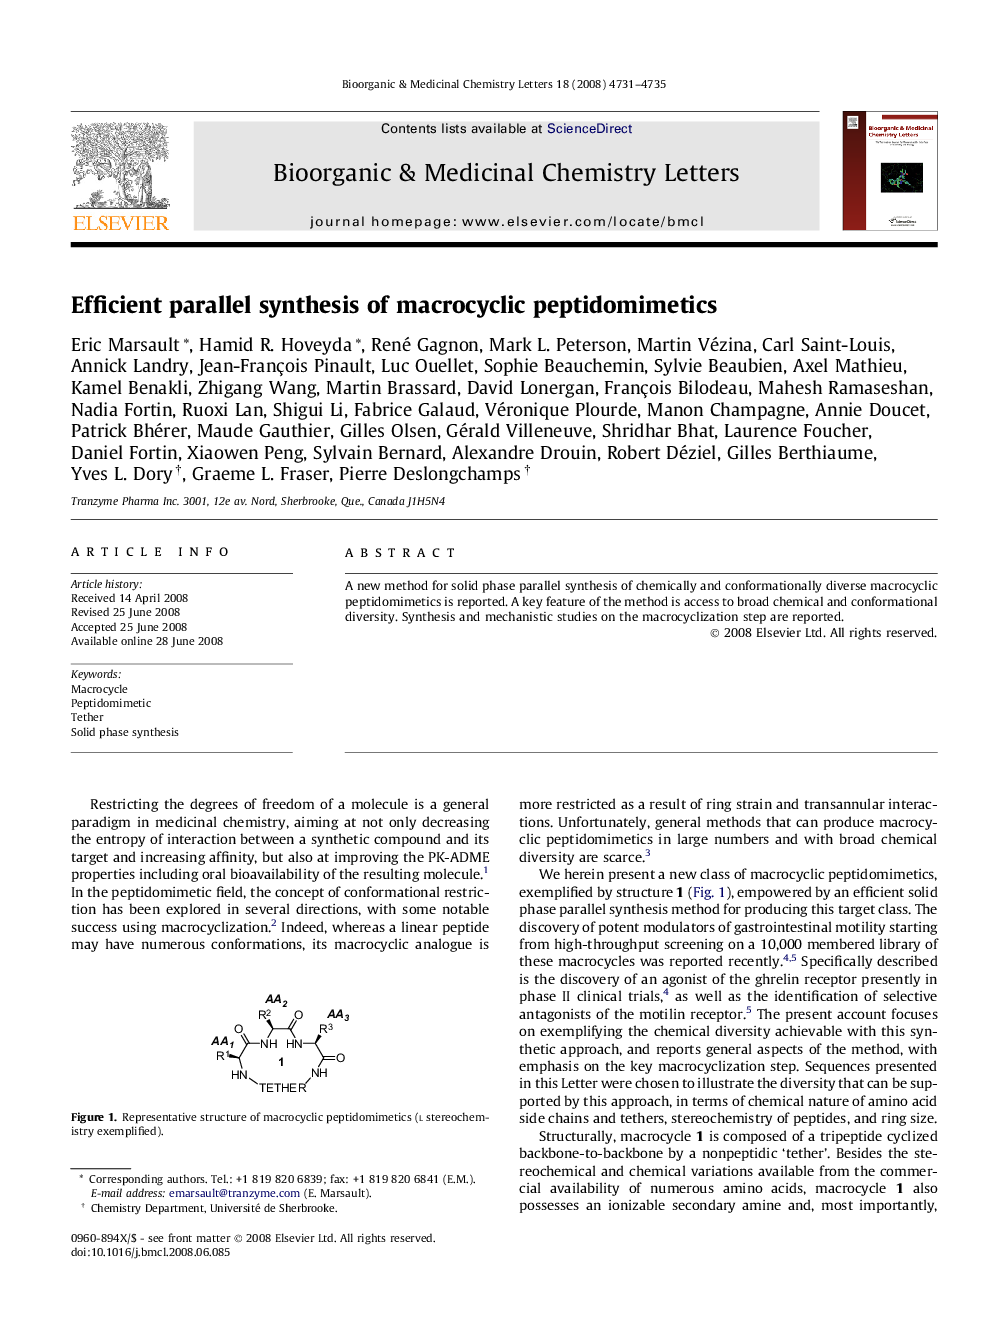 Efficient parallel synthesis of macrocyclic peptidomimetics